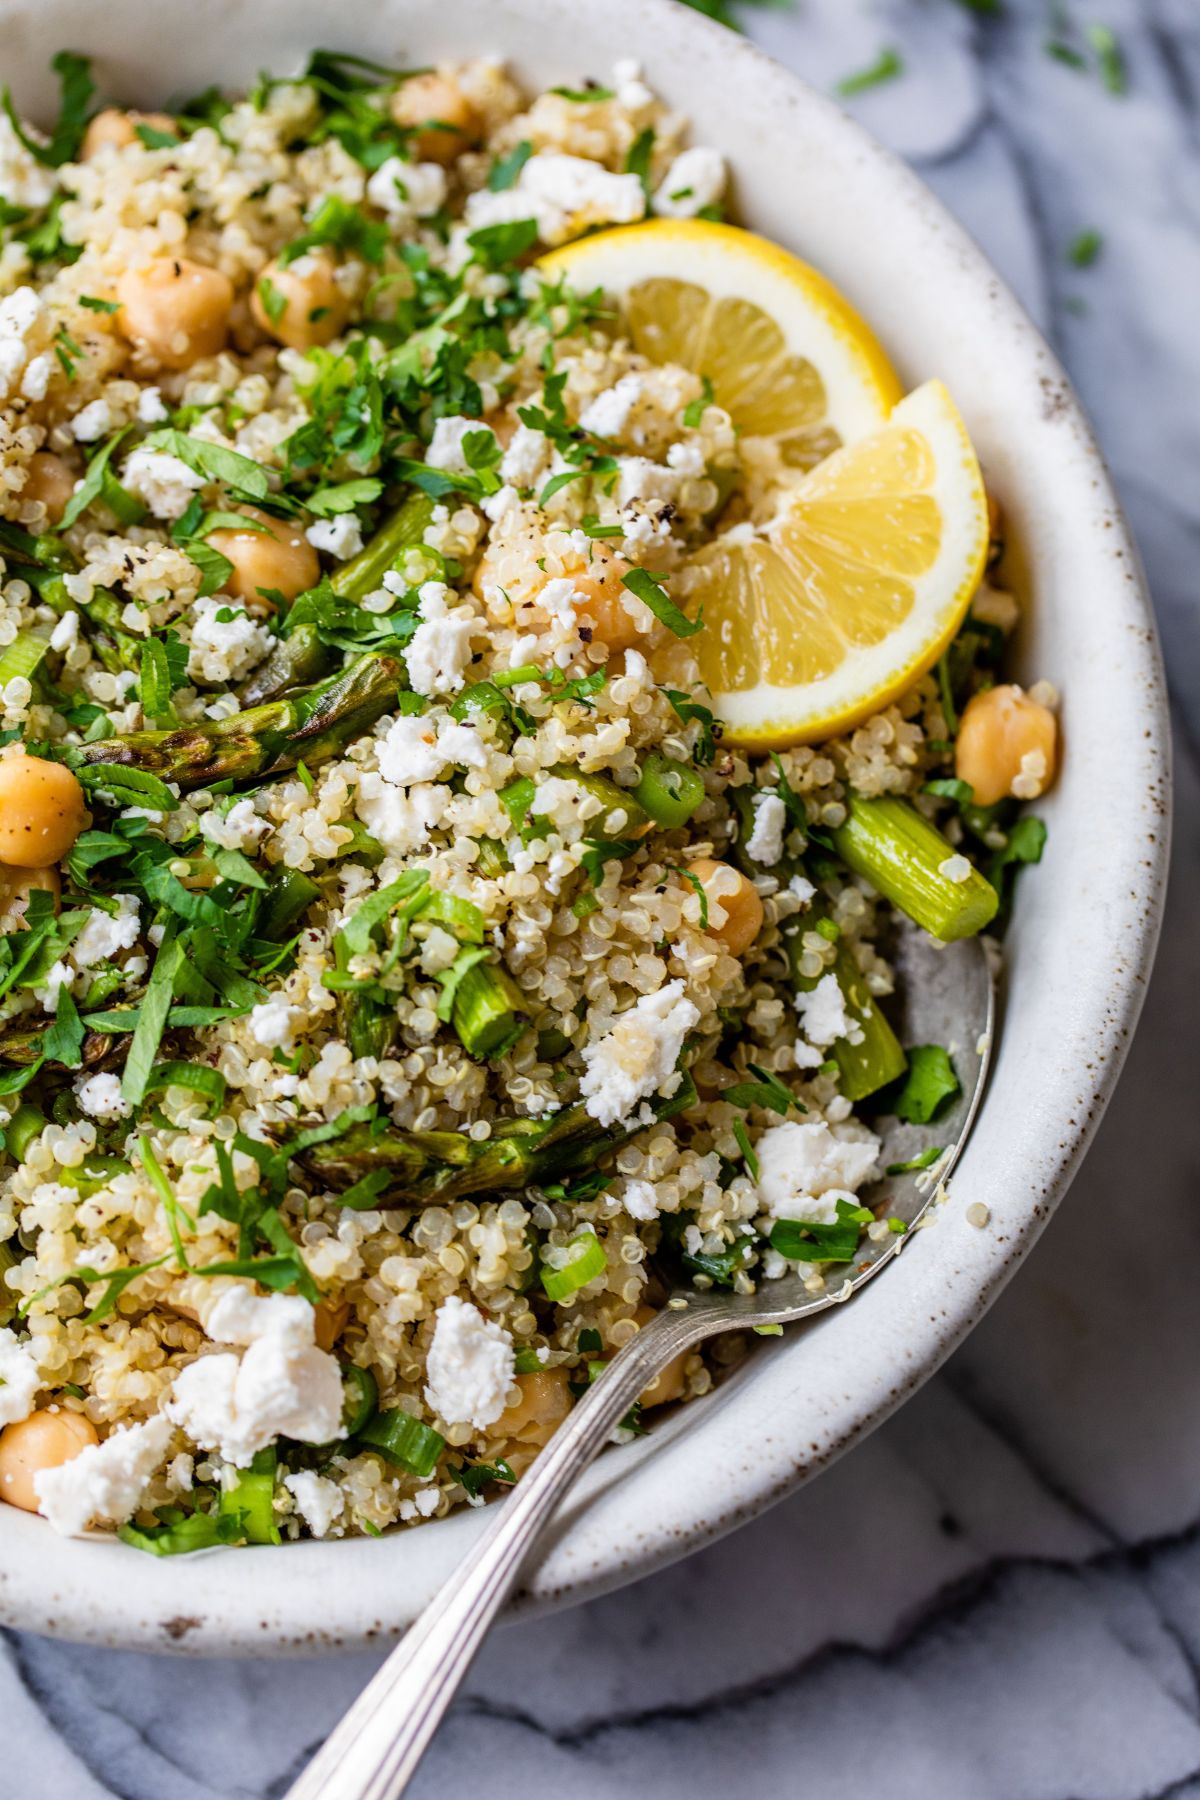 Quinoa Asparagus Salad topped with feta and served with lemon wedges.